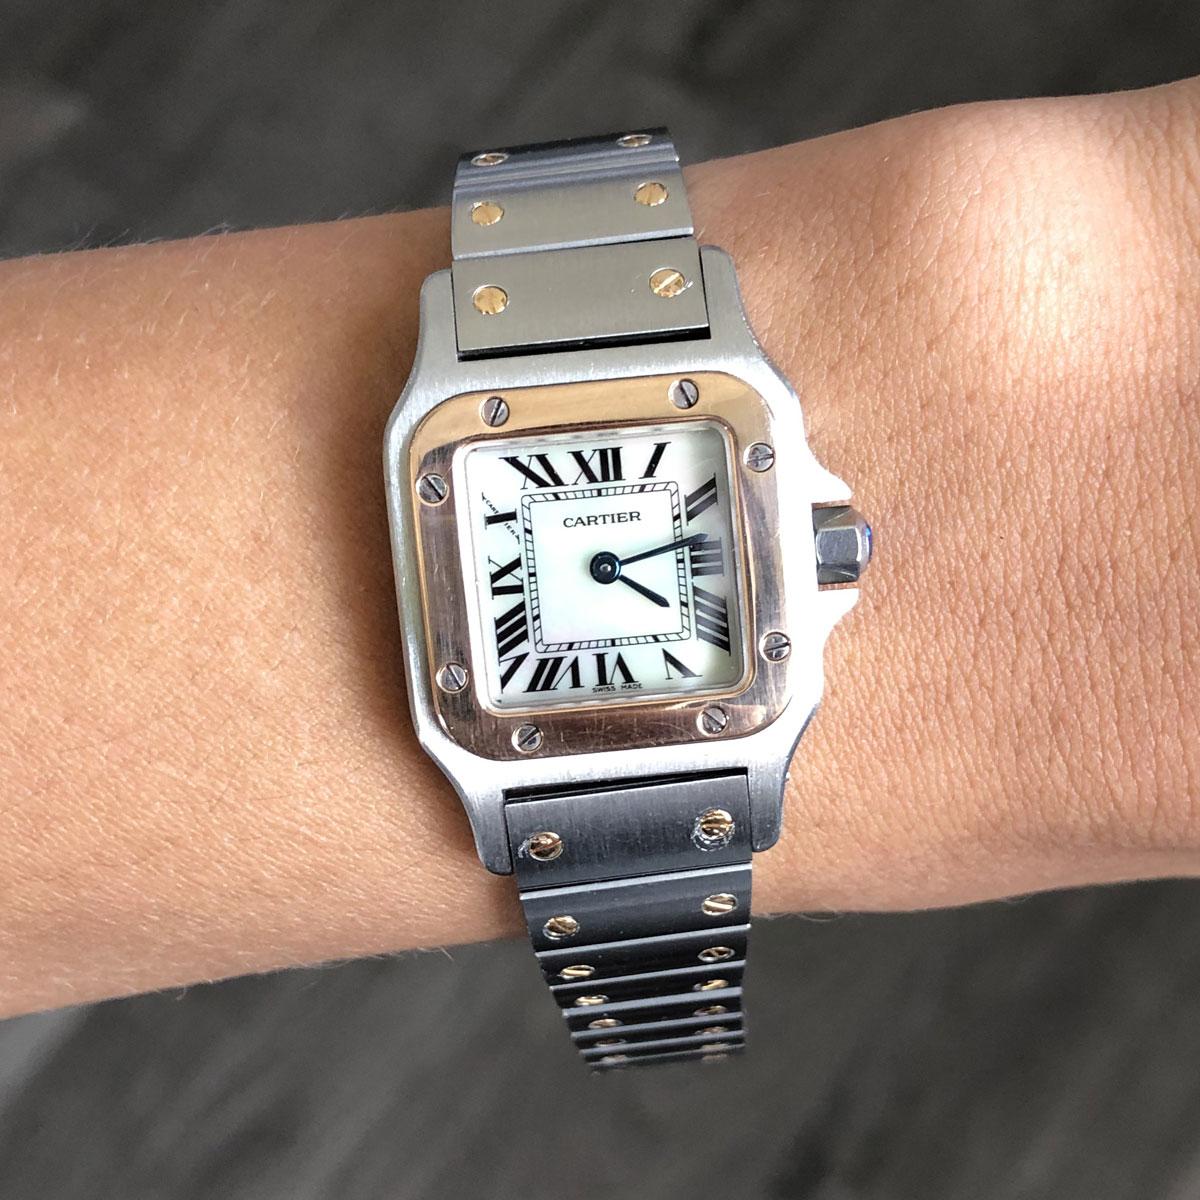 Brand: Cartier
MPN: 1567
Model: Santos Galbee
Case Material: 18k rose gold and Stainless steel
Case Diameter: 24mm
Crystal: Sapphire crystal
Bezel: Smooth yellow bezel with stainless steel
Dial: White Mother of Pearl dial with roman numerals and